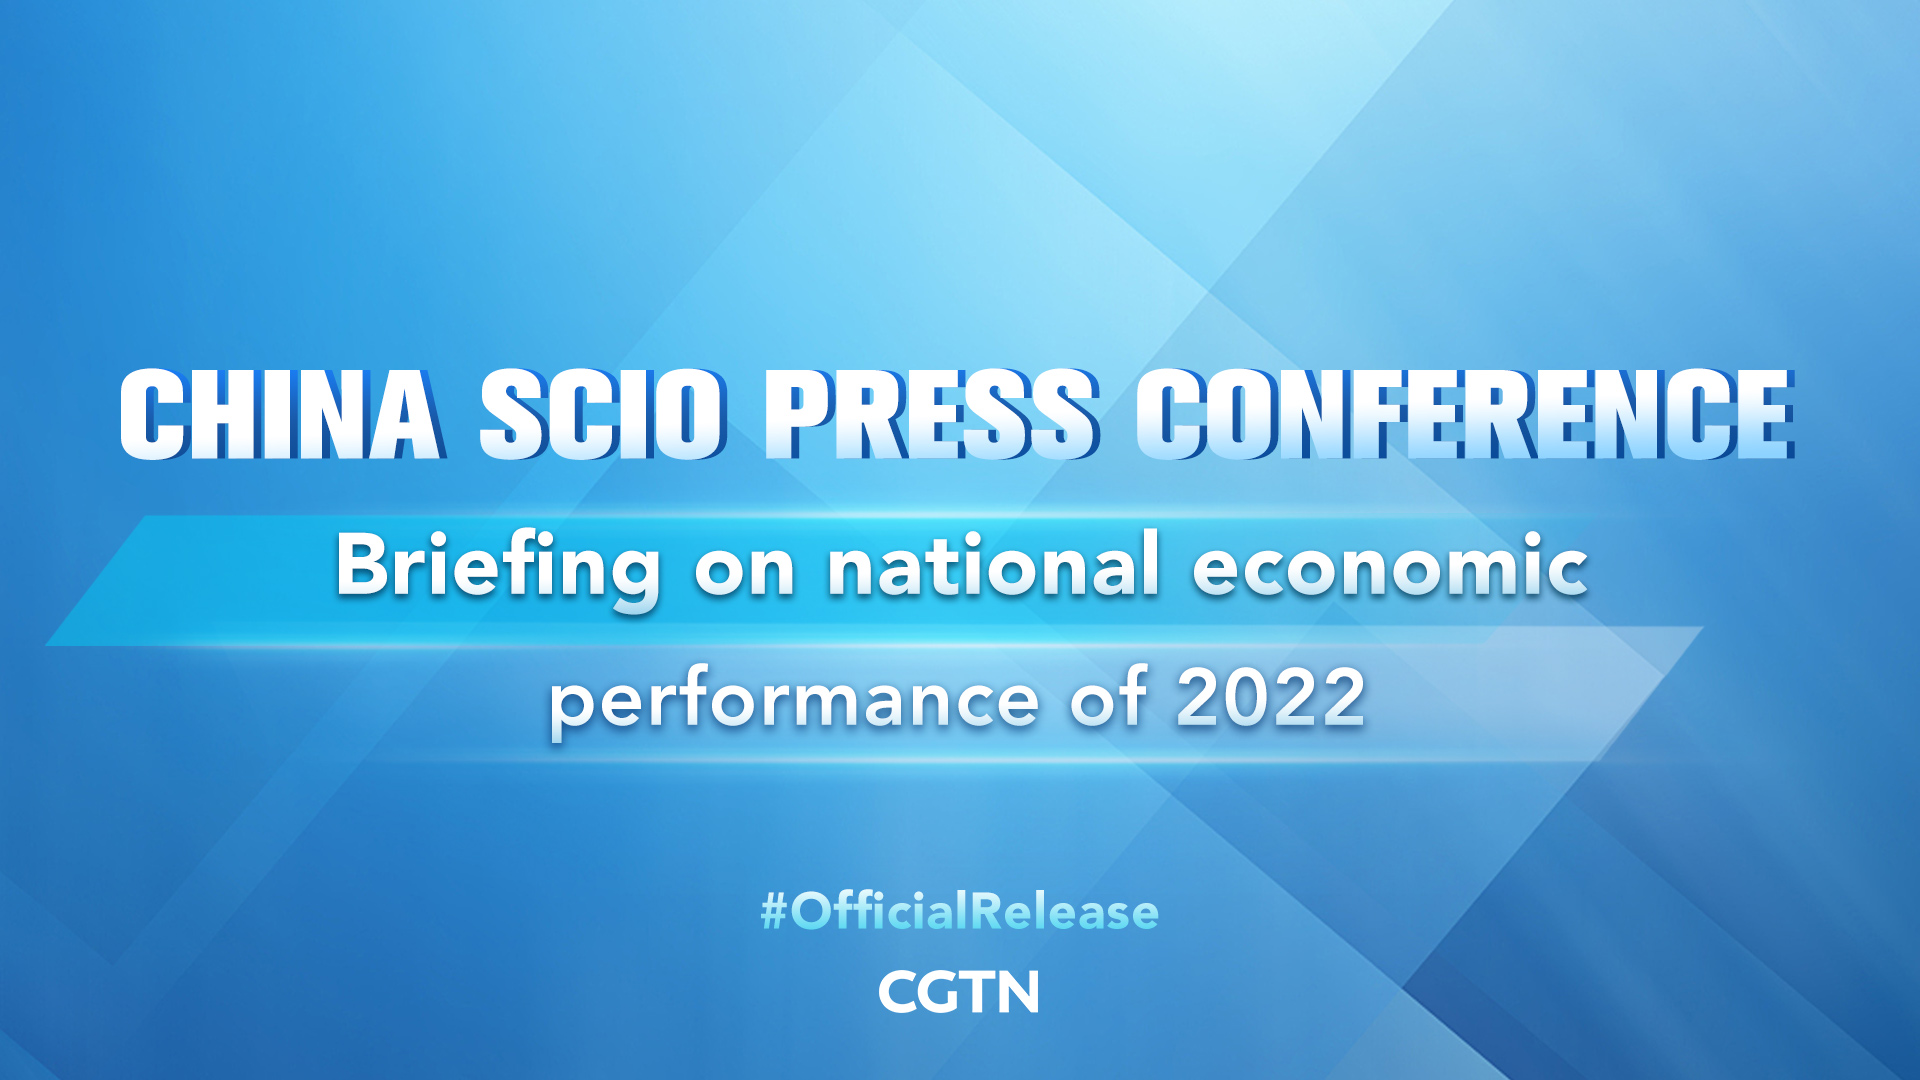 Live: Press conference on national economic performance of 2022